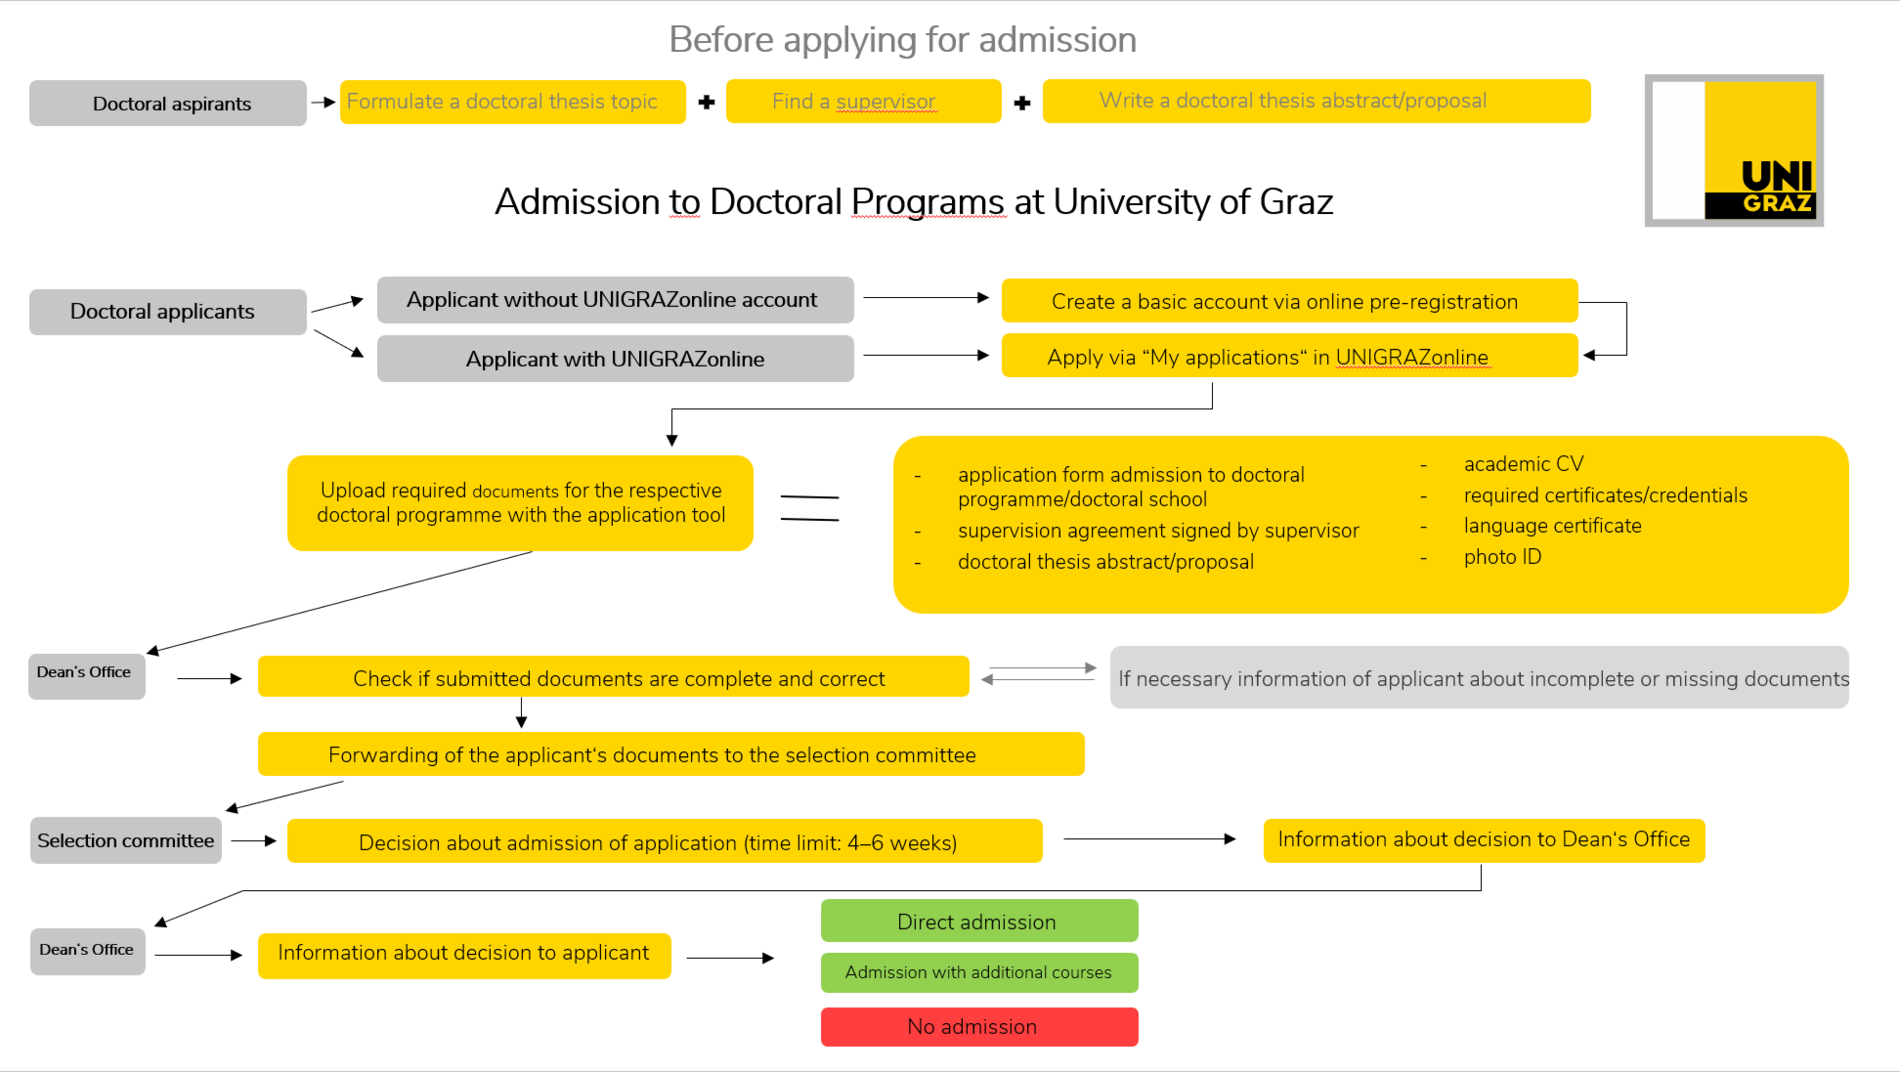 A graphic representation of the approval process according to approval NEW ©Raphaela Hemet, Gerald Lind, Doctoral Academy Graz 